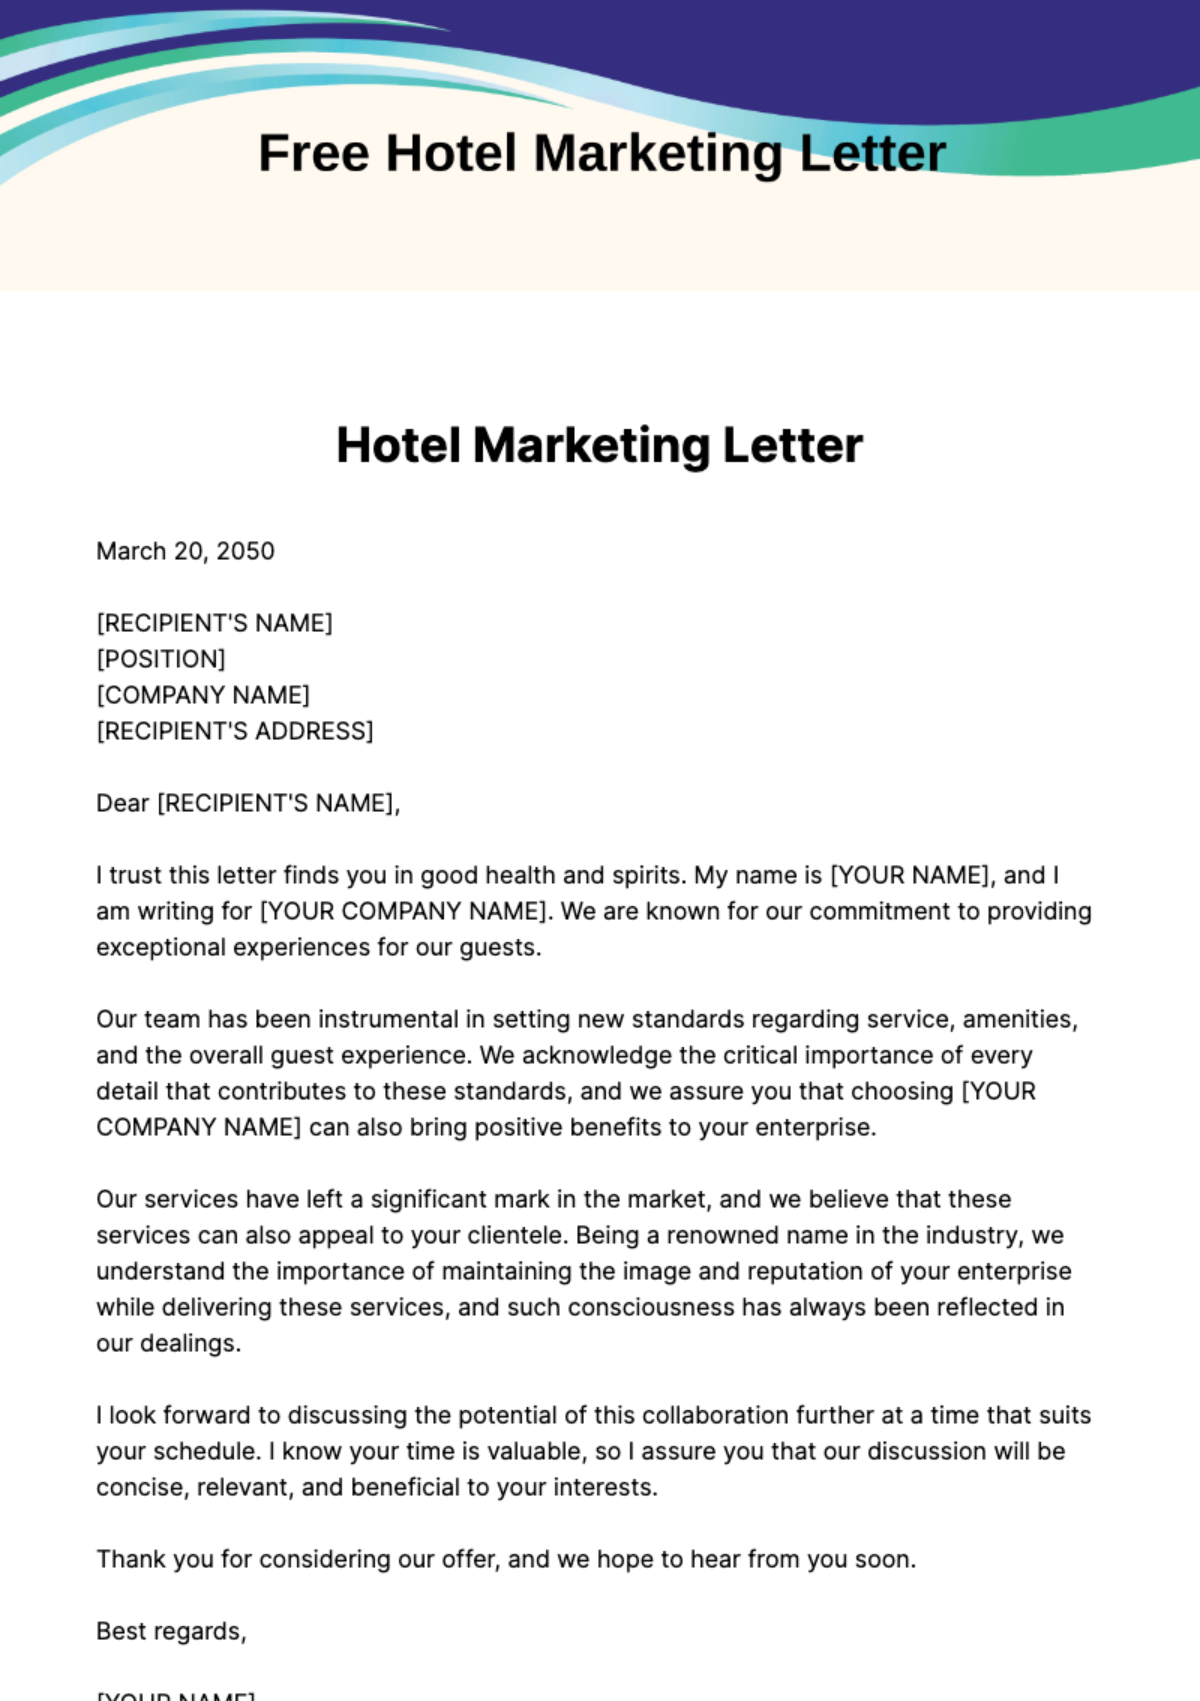 Free Hotel Marketing Letter Template